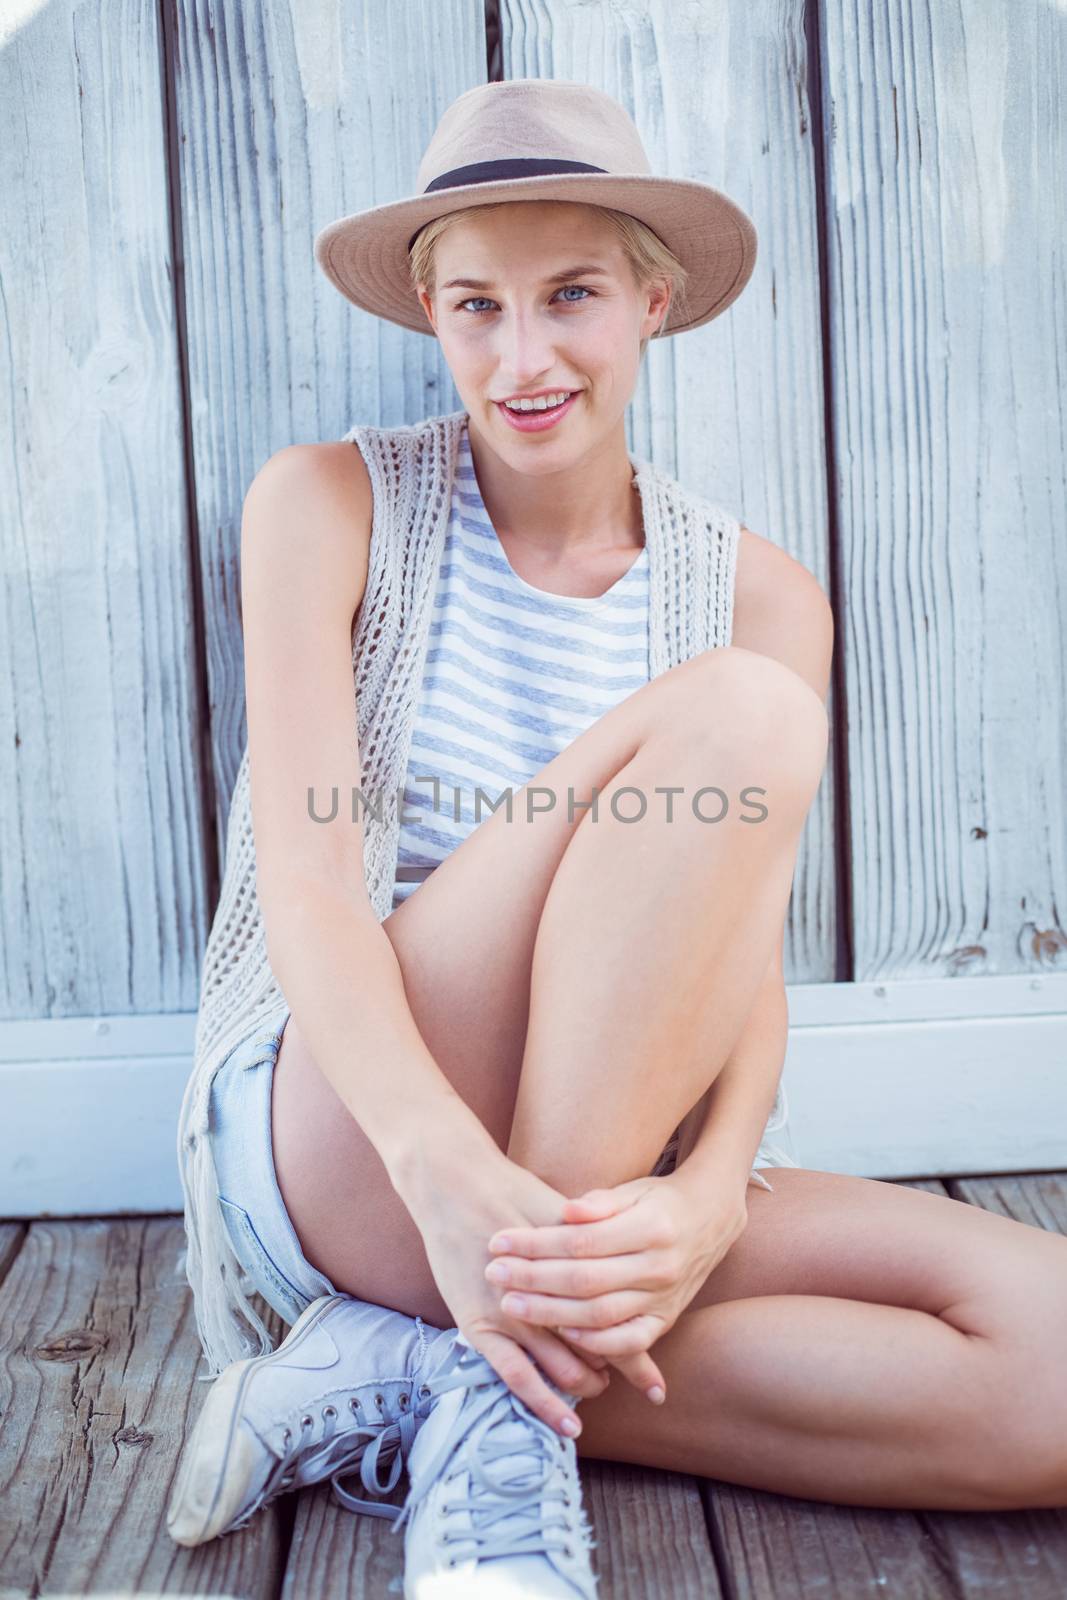 Pretty blonde woman wearing hat and smiling at camera by Wavebreakmedia